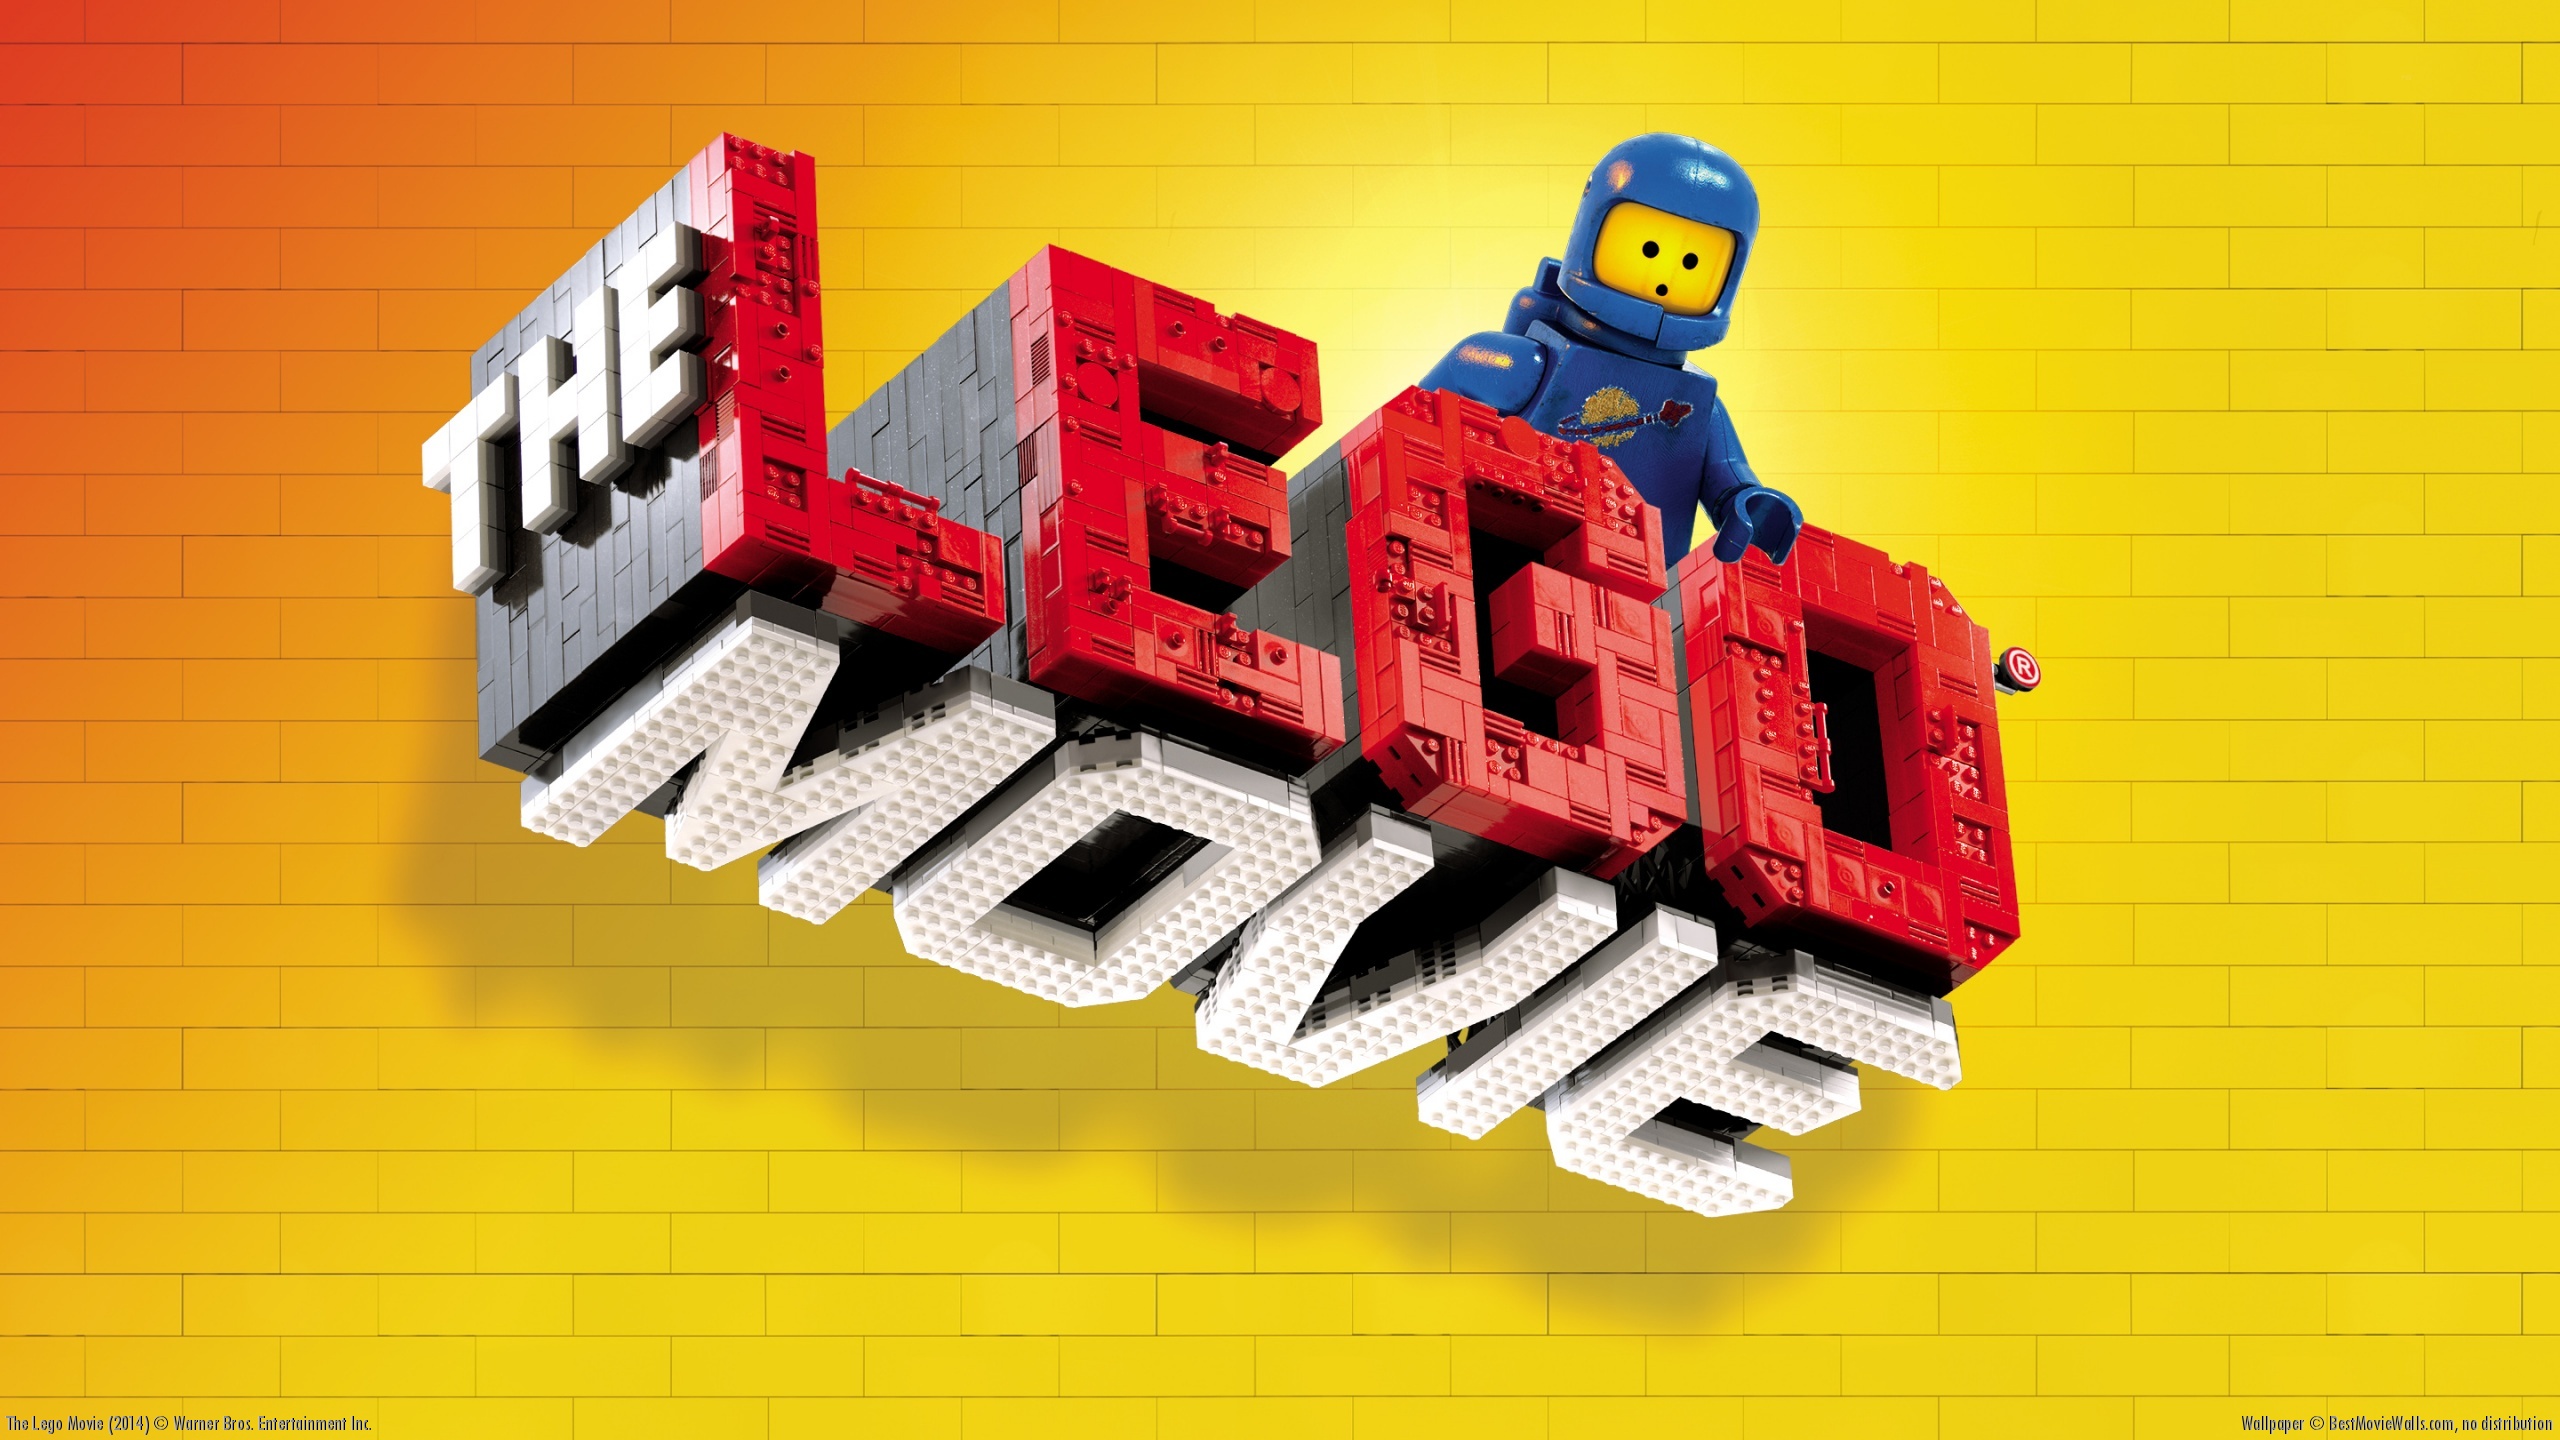 The Coolest Most Awesome Lego Movie Wallpaper On Web